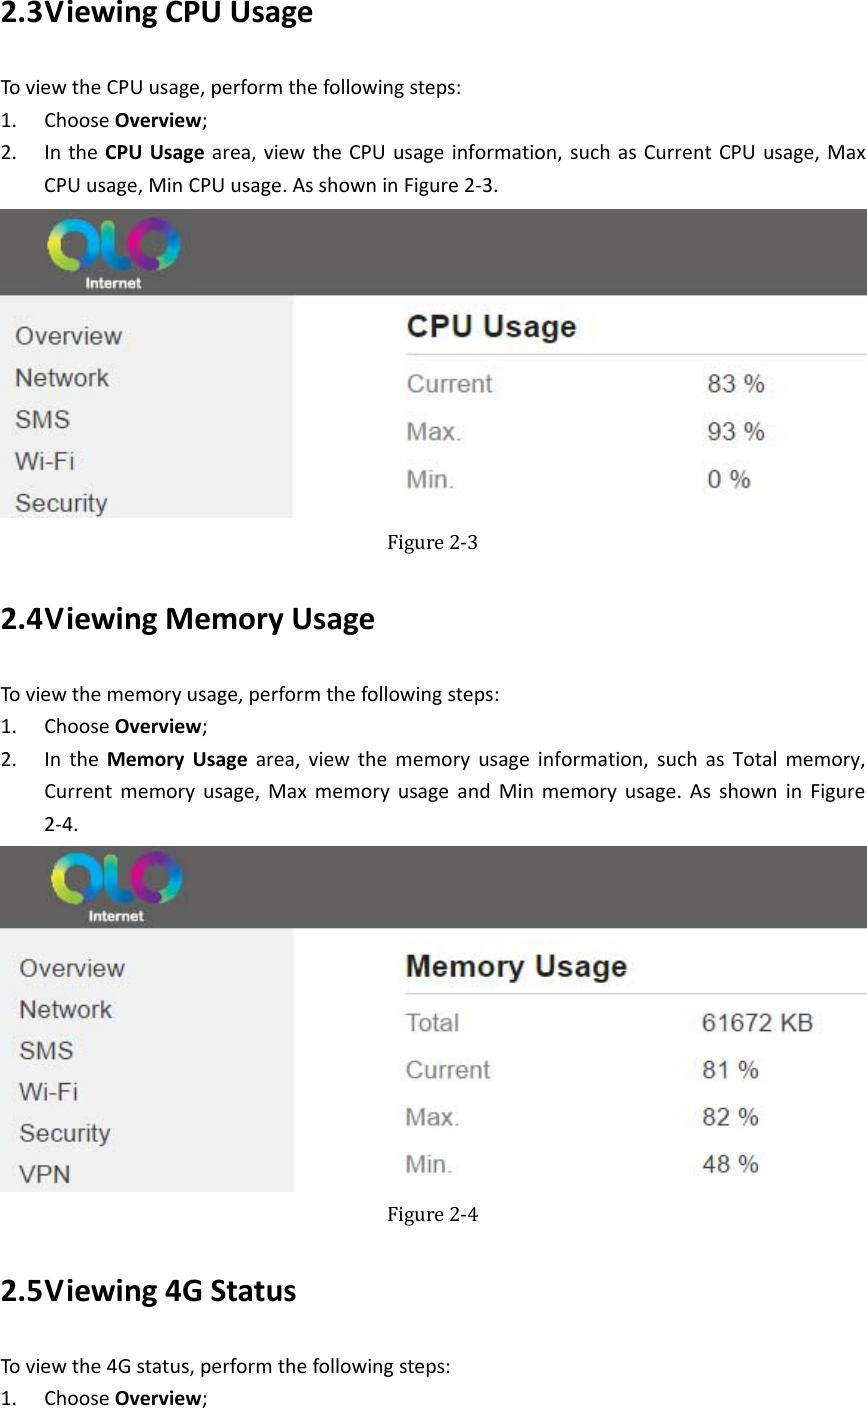   2.3 ViewingCPUUsageToviewtheCPUusage,performthefollowingsteps:1. ChooseOverview;2. IntheCPUUsagearea,viewtheCPUusageinformation,suchasCurrentCPUusage,MaxCPUusage,MinCPUusage.AsshowninFigure2‐3. Figure2‐32.4 ViewingMemoryUsageToviewthememoryusage,performthefollowingsteps:1. ChooseOverview;2. IntheMemoryUsagearea,viewthememoryusageinformation,suchasTotalmemory,Currentmemoryusage,MaxmemoryusageandMinmemoryusage.AsshowninFigure2‐4. Figure2‐42.5 Viewing4GStatusToviewthe4Gstatus,performthefollowingsteps:1. ChooseOverview;